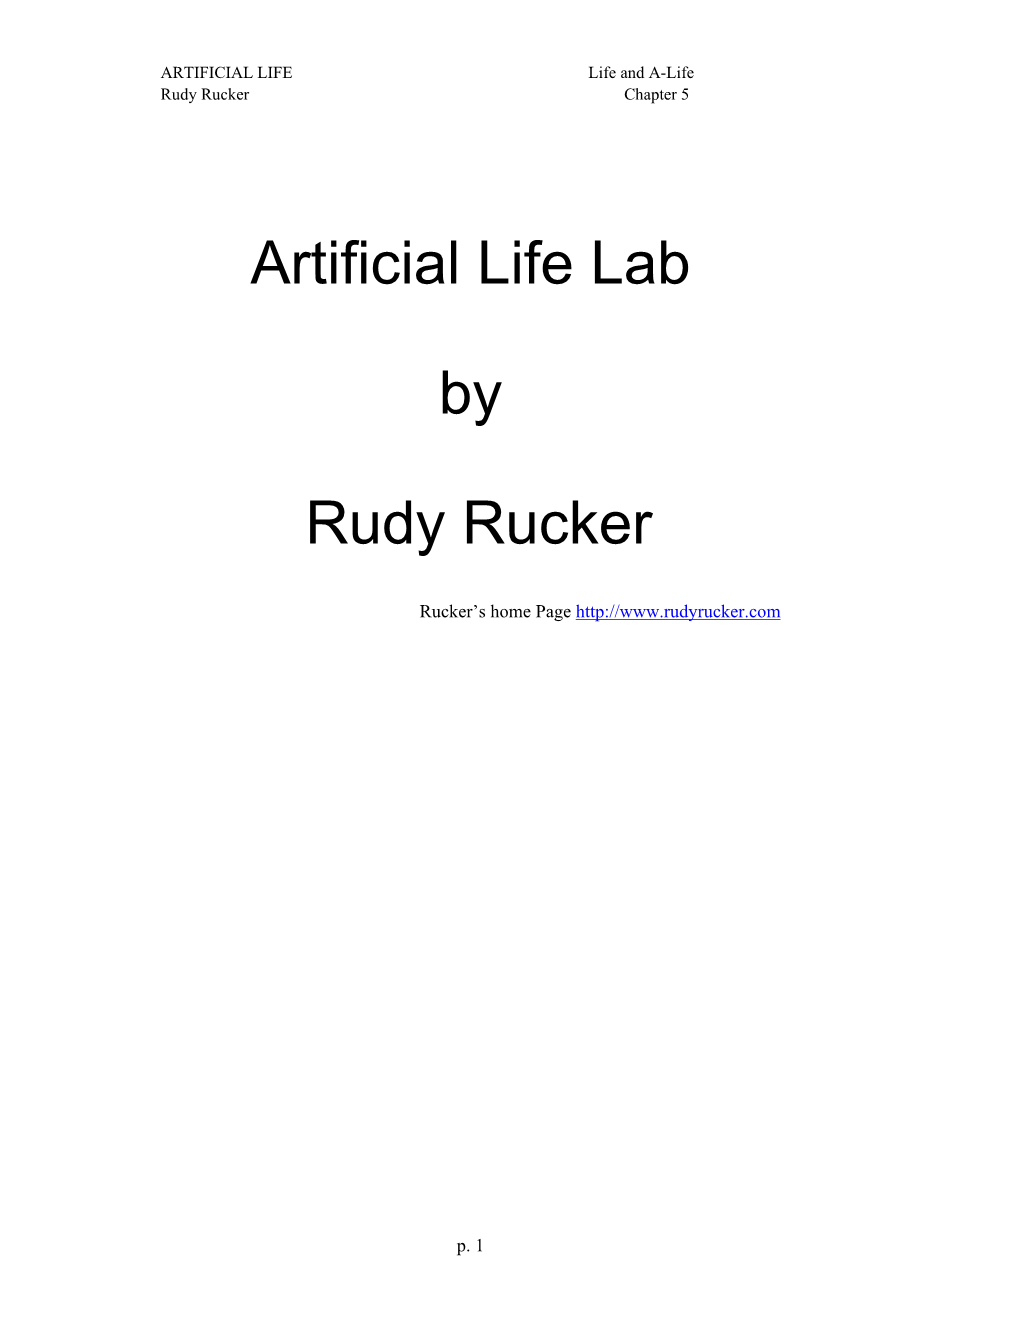 Artificial Life, Chapter